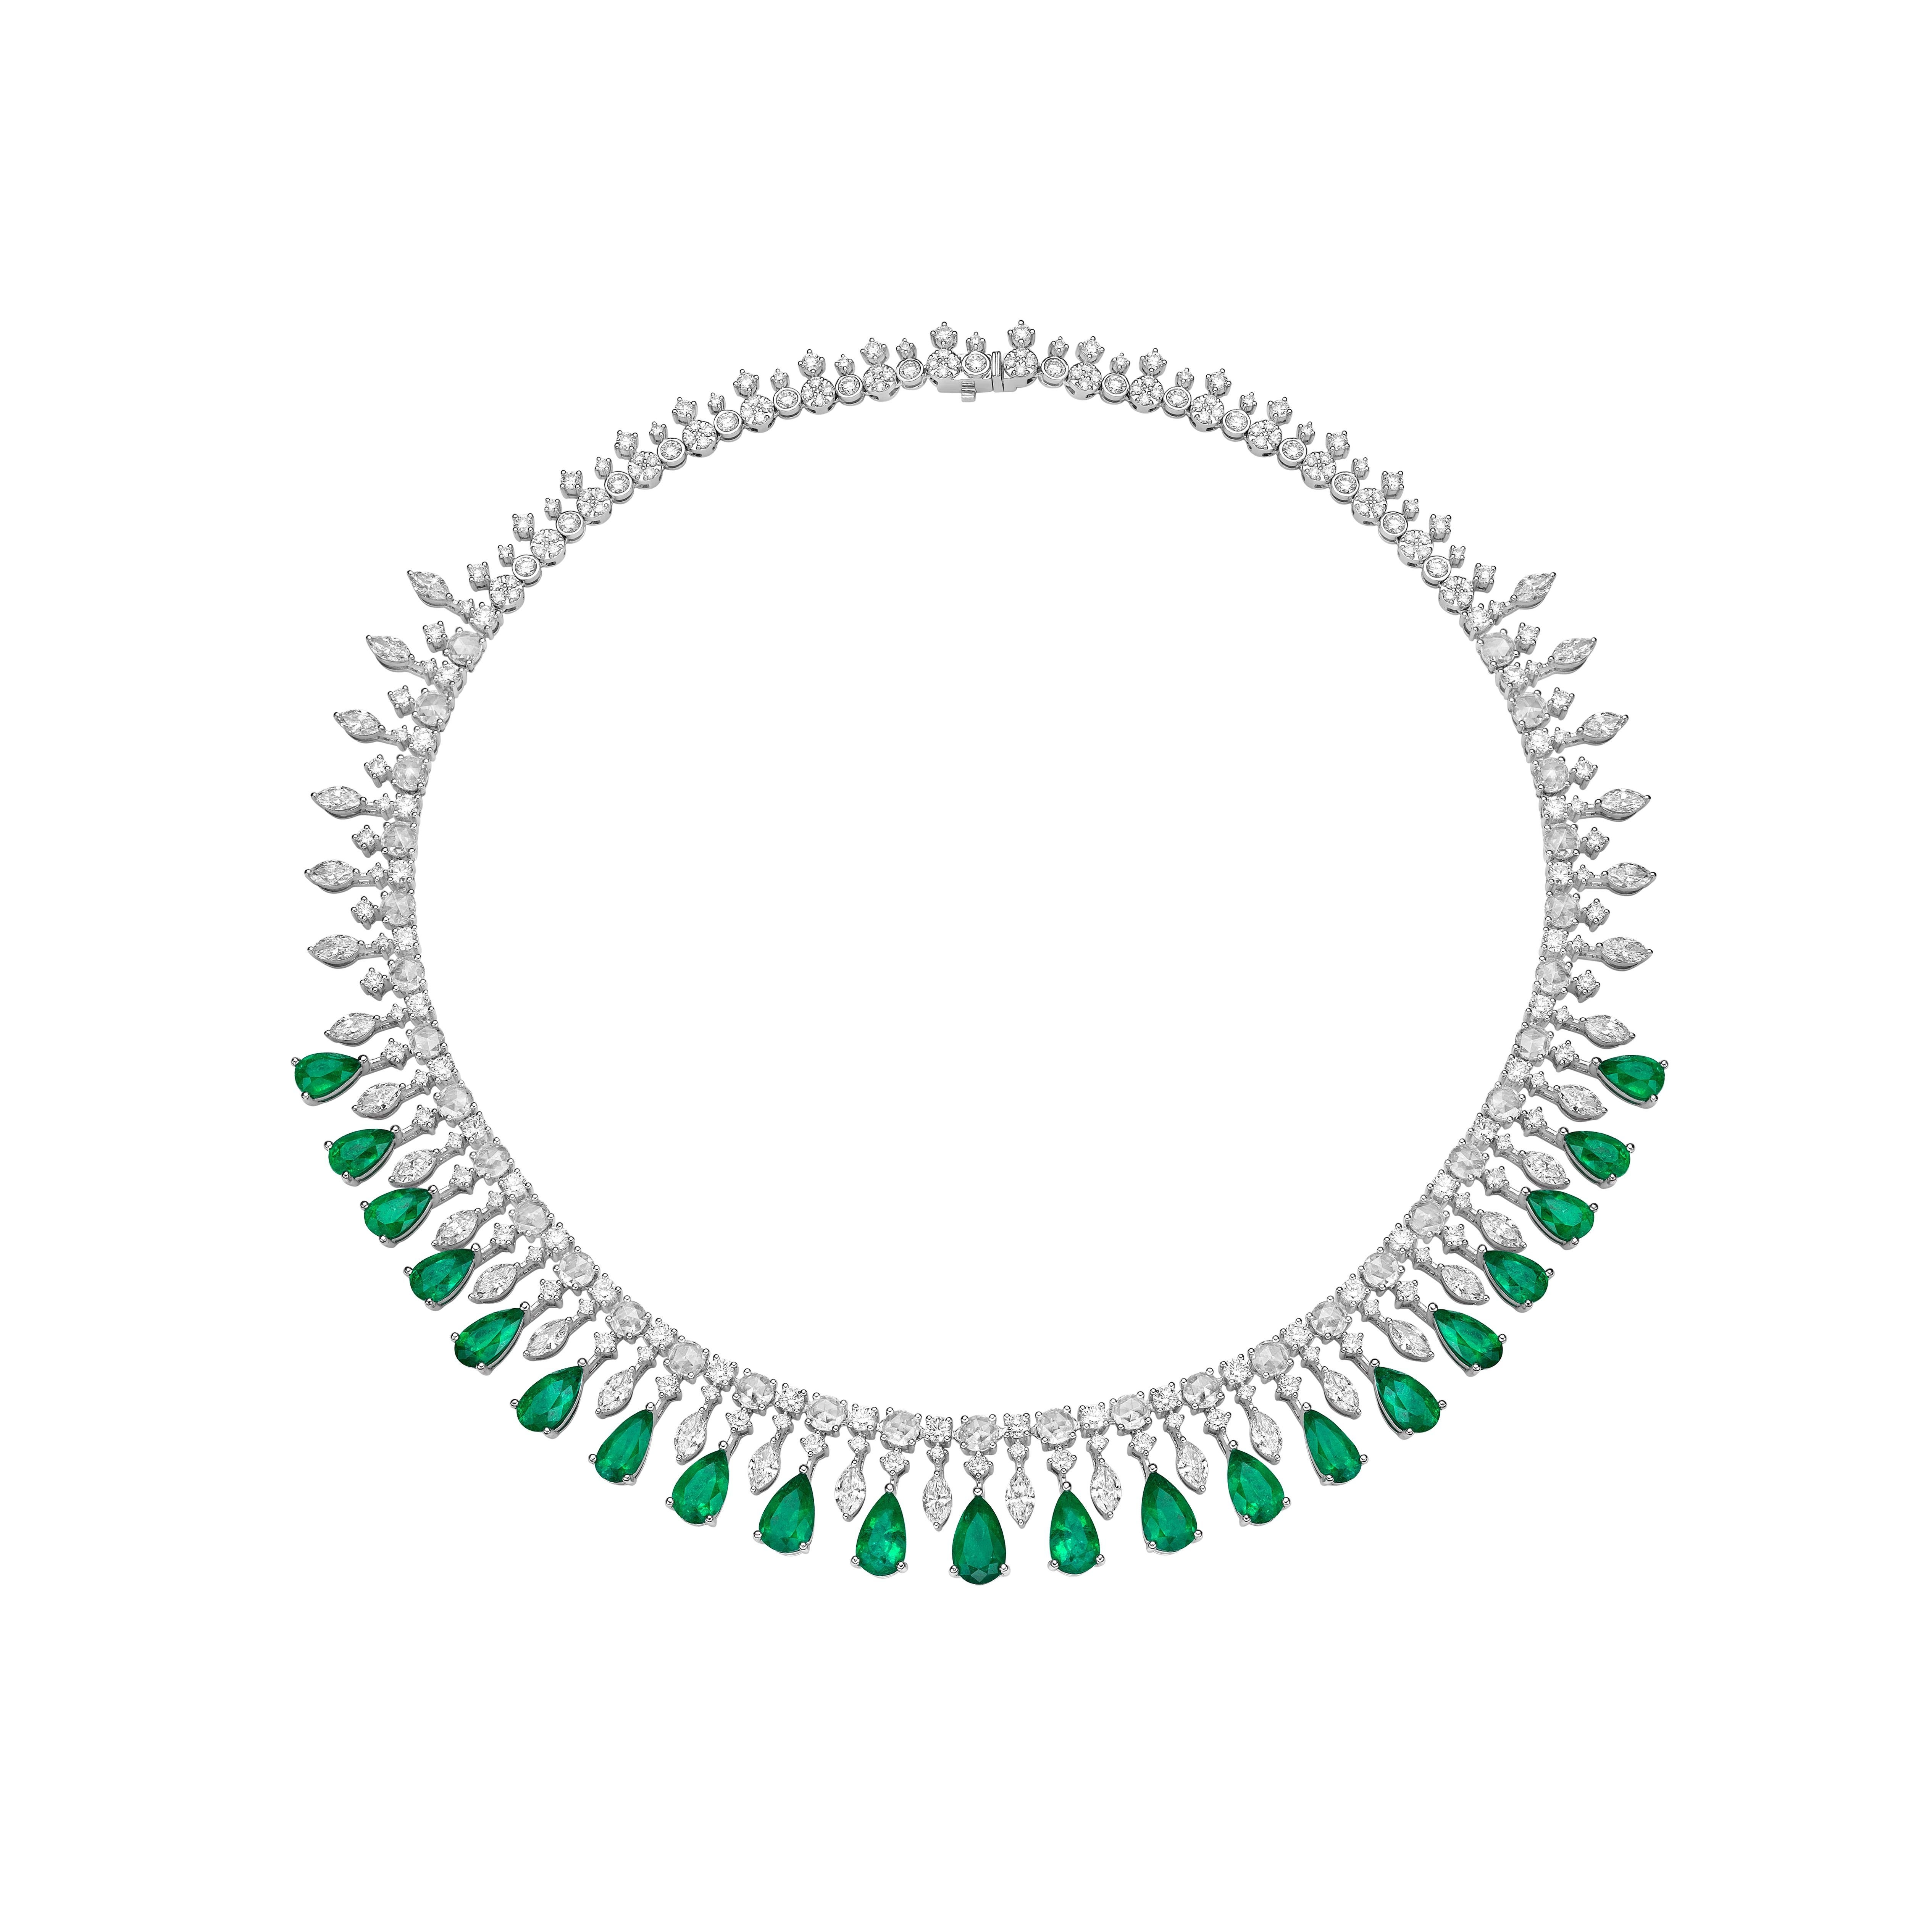 Sunflower Emeralds by Sunita Nahata Fine Design. This collection features vibrant green emeralds set on a bed of stunning White diamonds set in white gold. This is a dainty and delicate bridal necklace that still exudes a glamorous and luxurious